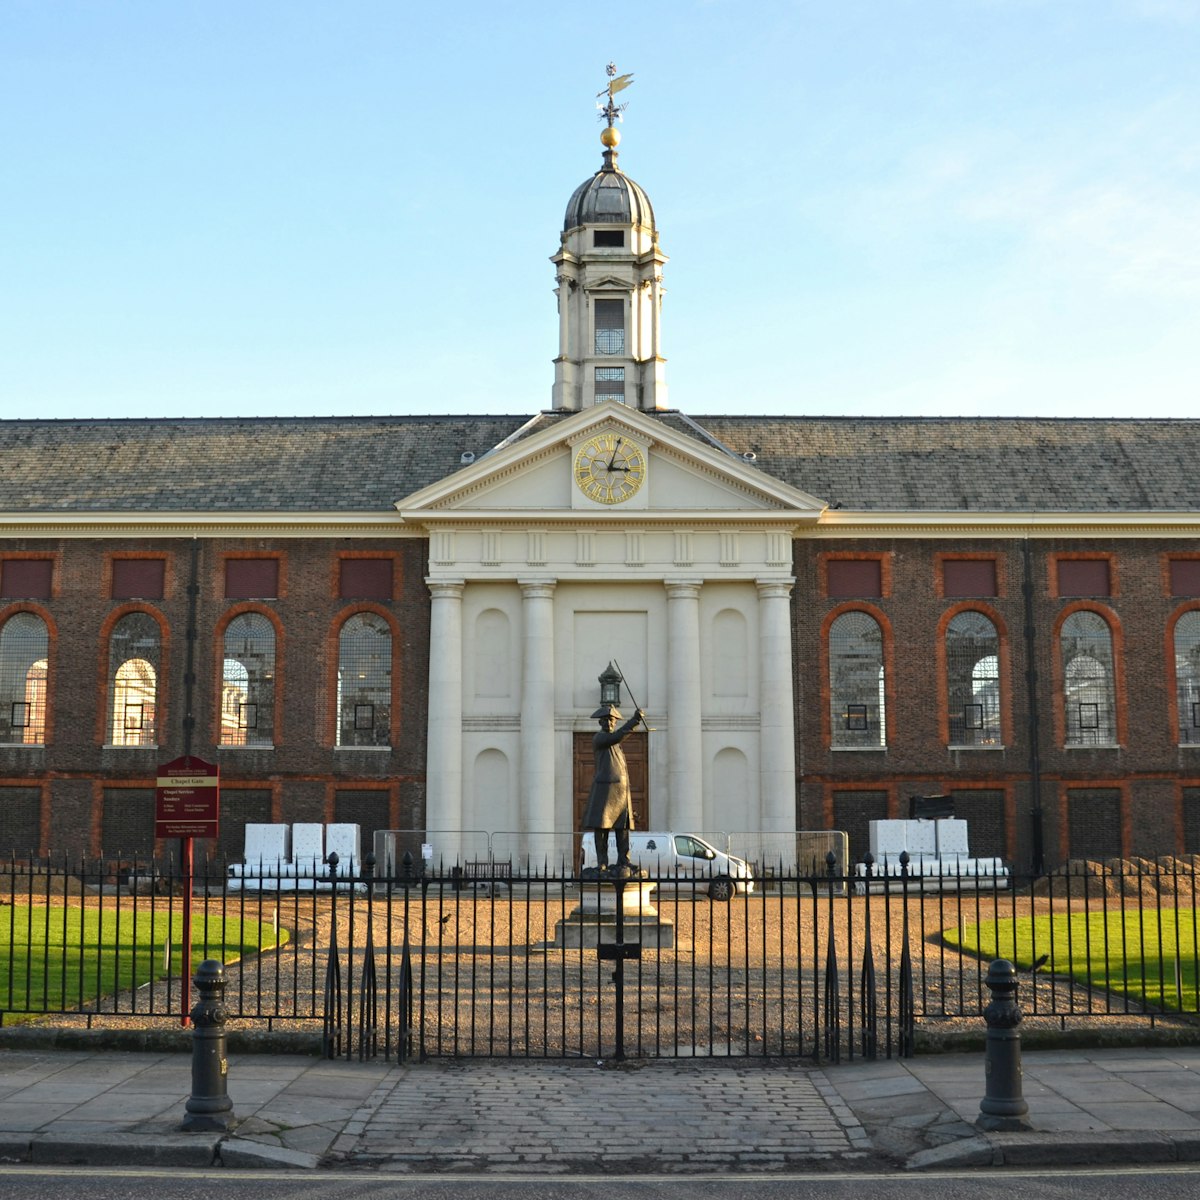 The front of Royal Chelsea Hospital, famous for housing the Chelsea Pensioners